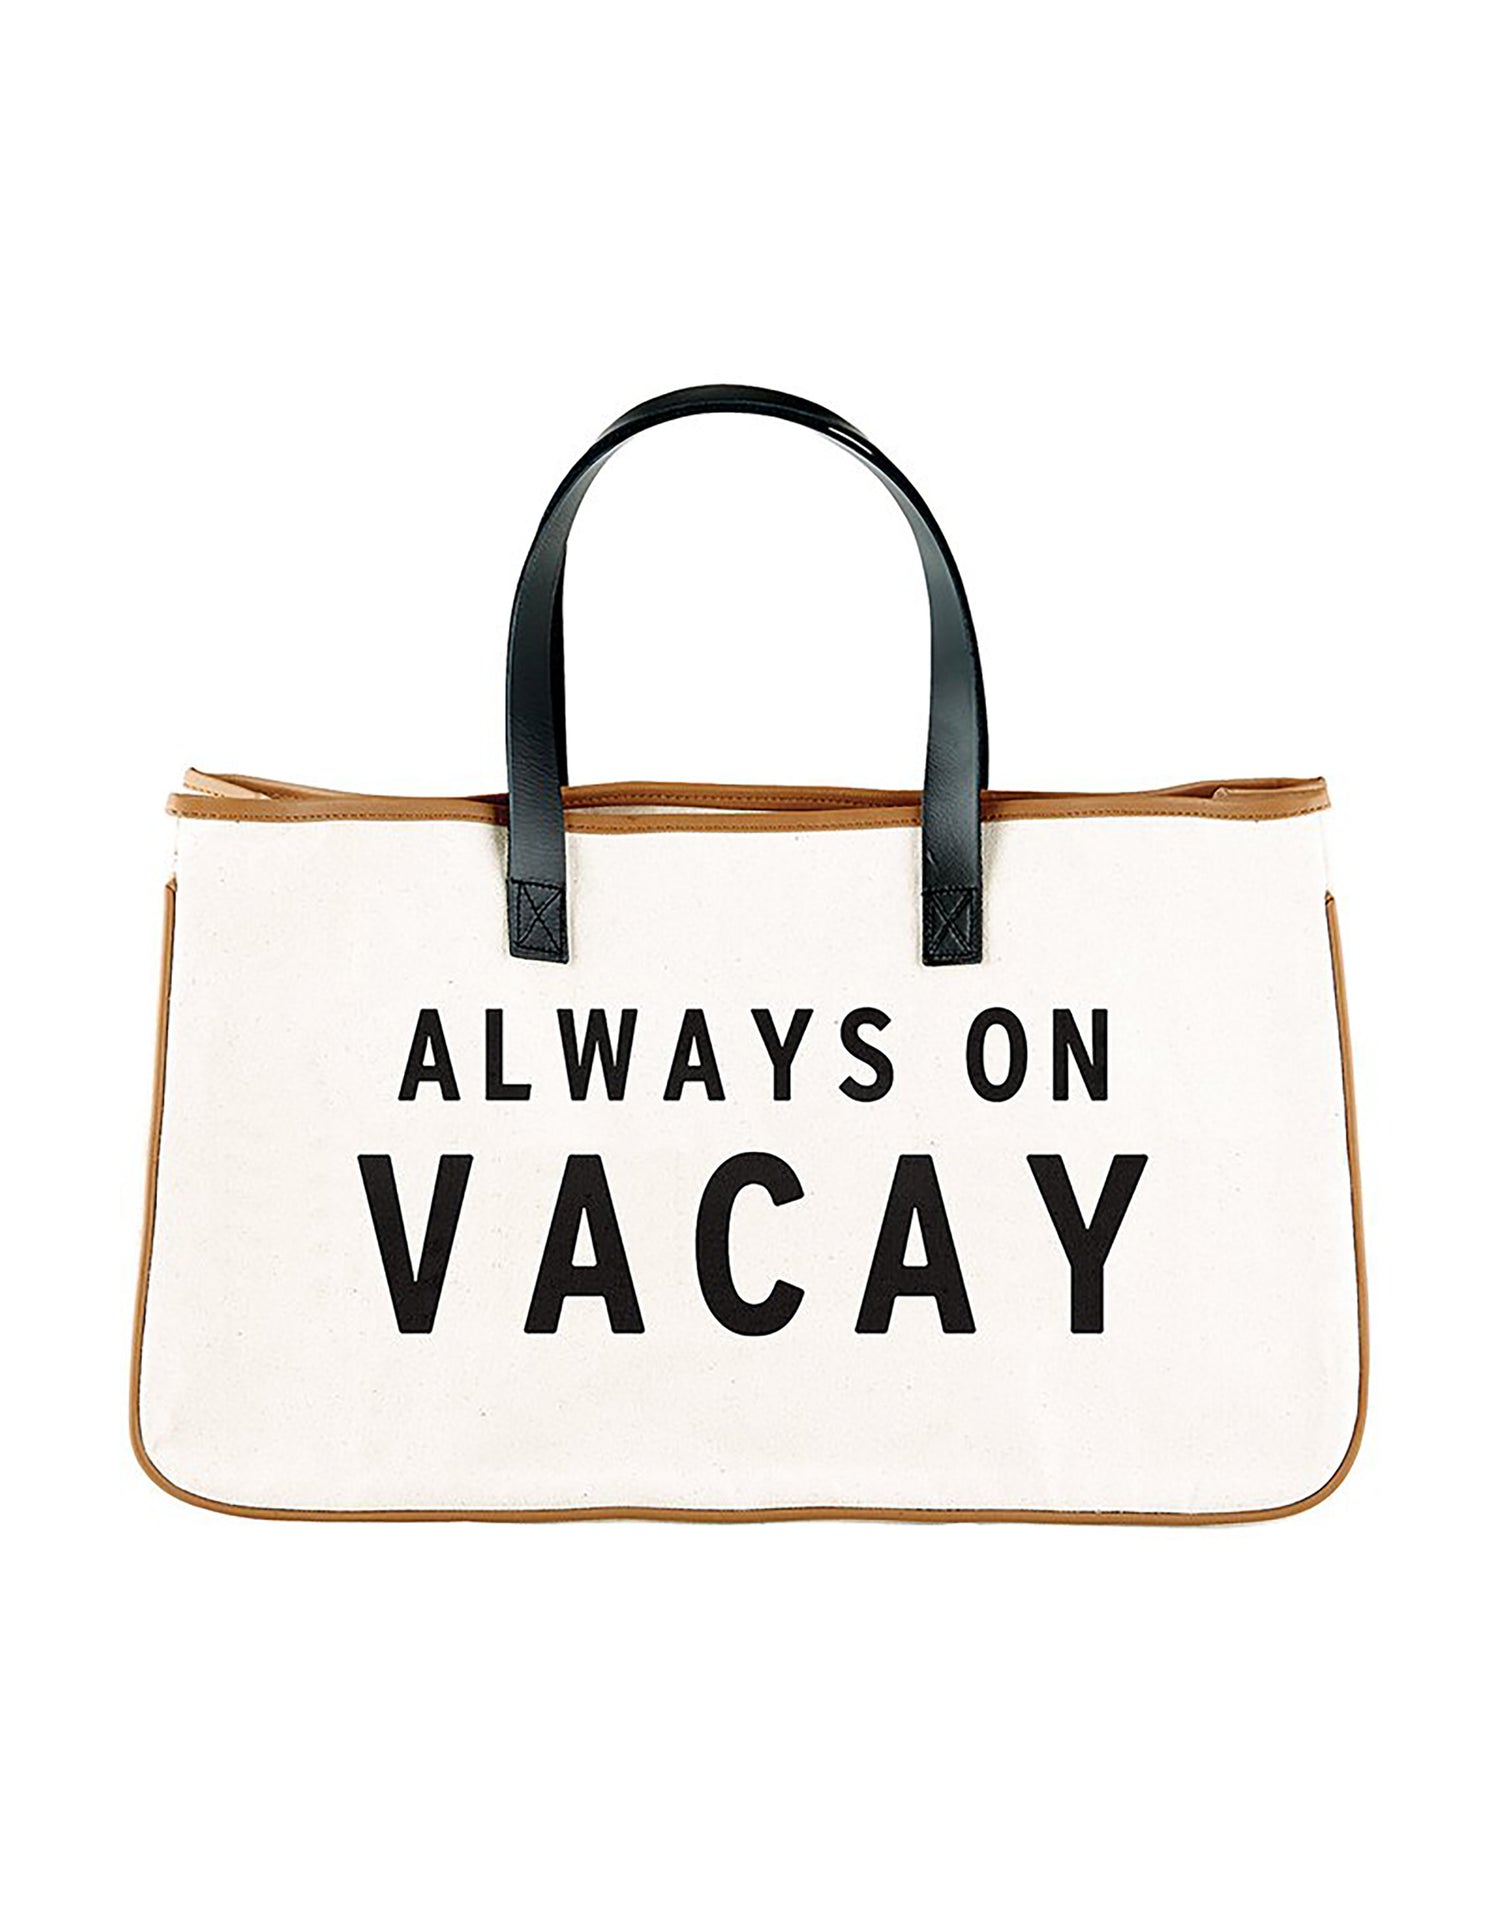 Always On Vacay Tote in Canvas by Santa Barbara Design Studio - Product View 